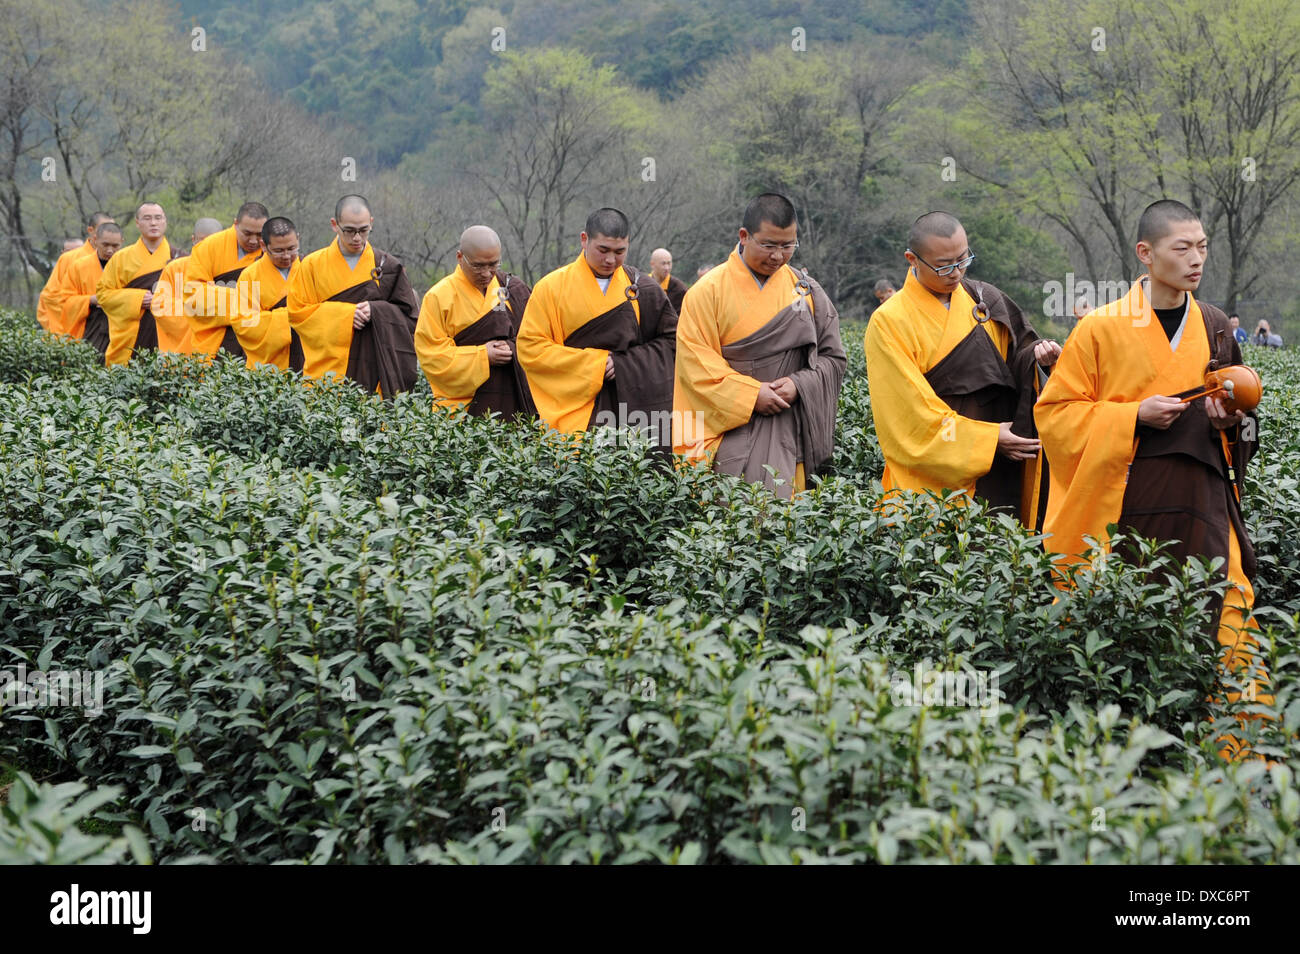 (140324) -- HANGZHOU, March 24, 2014 (Xinhua) -- Monks hold a 'cleaning' ceremony before picking tea at a tea garden in Fajing Buddha Temple in Hangzhou, capital of east China's Zhejiang Province, March 24, 2014. More than 40 monks in the Fajing Temple began to pick Fajing zen tea belonged to the temple Monday. The Fajing zen tea, produced within the origin area of West Lake Dragon Well(Longjing) Tea, is planted, picked and drinked by monks themselves in the temple. Zen tea is a special tea culture for Buddhists to be enlightened with Buddha dharma through tea making and drinking. (Xinhua/Ju H Stock Photo